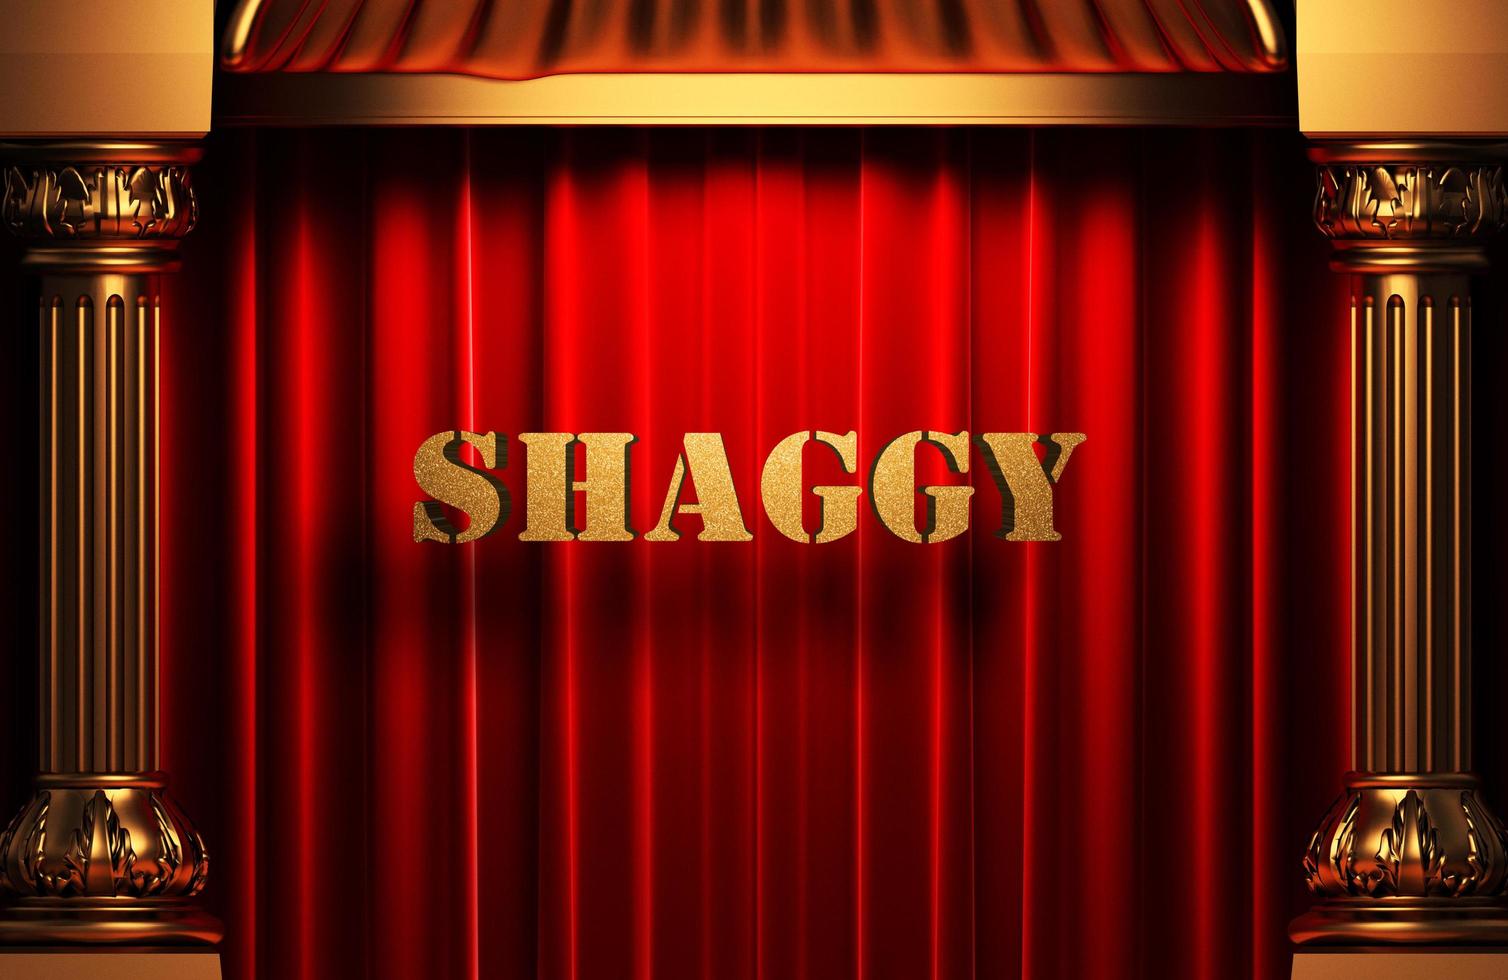 shaggy golden word on red curtain photo